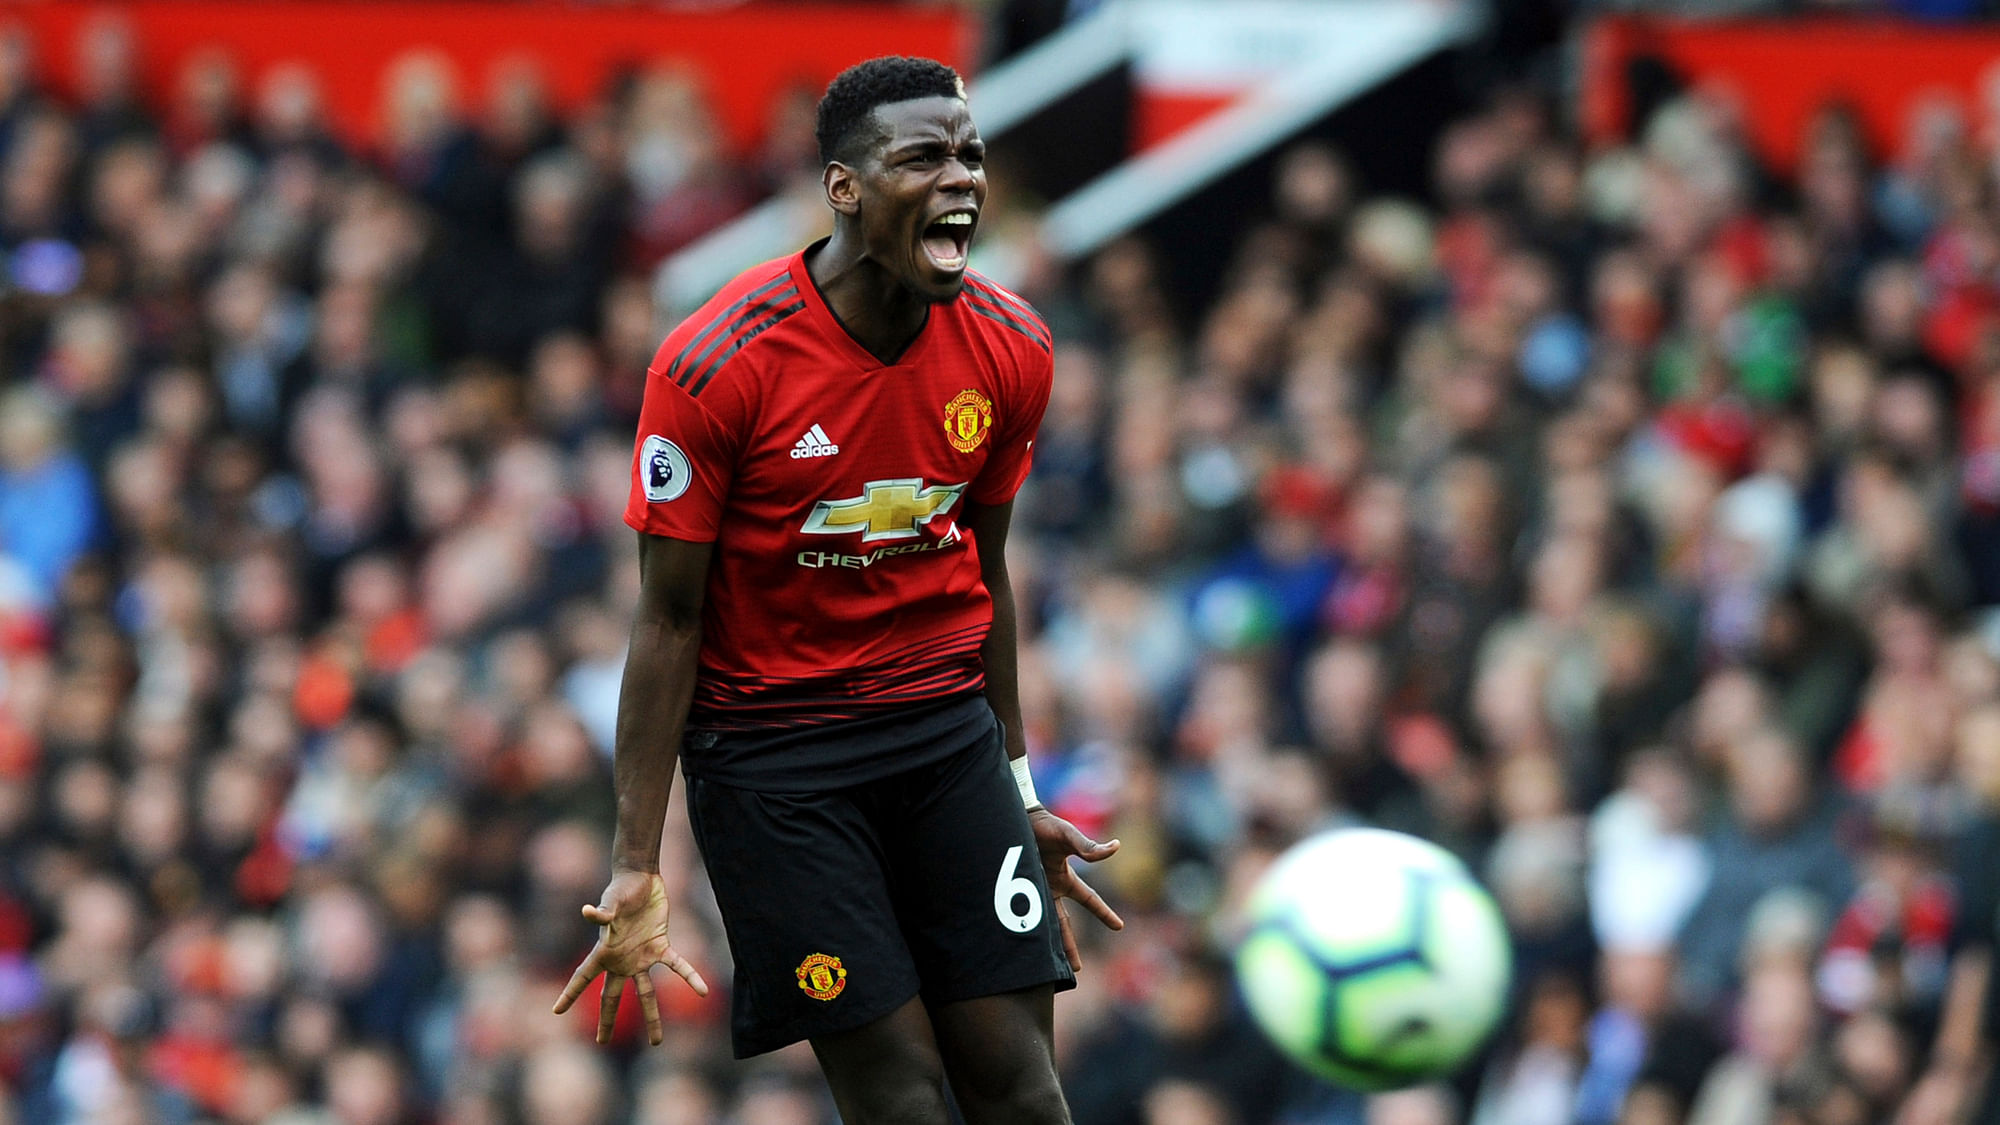 Manchester United’s Paul Pogba has been relieved of his duties as the team’s vice captain by manager Jose Mourinho.